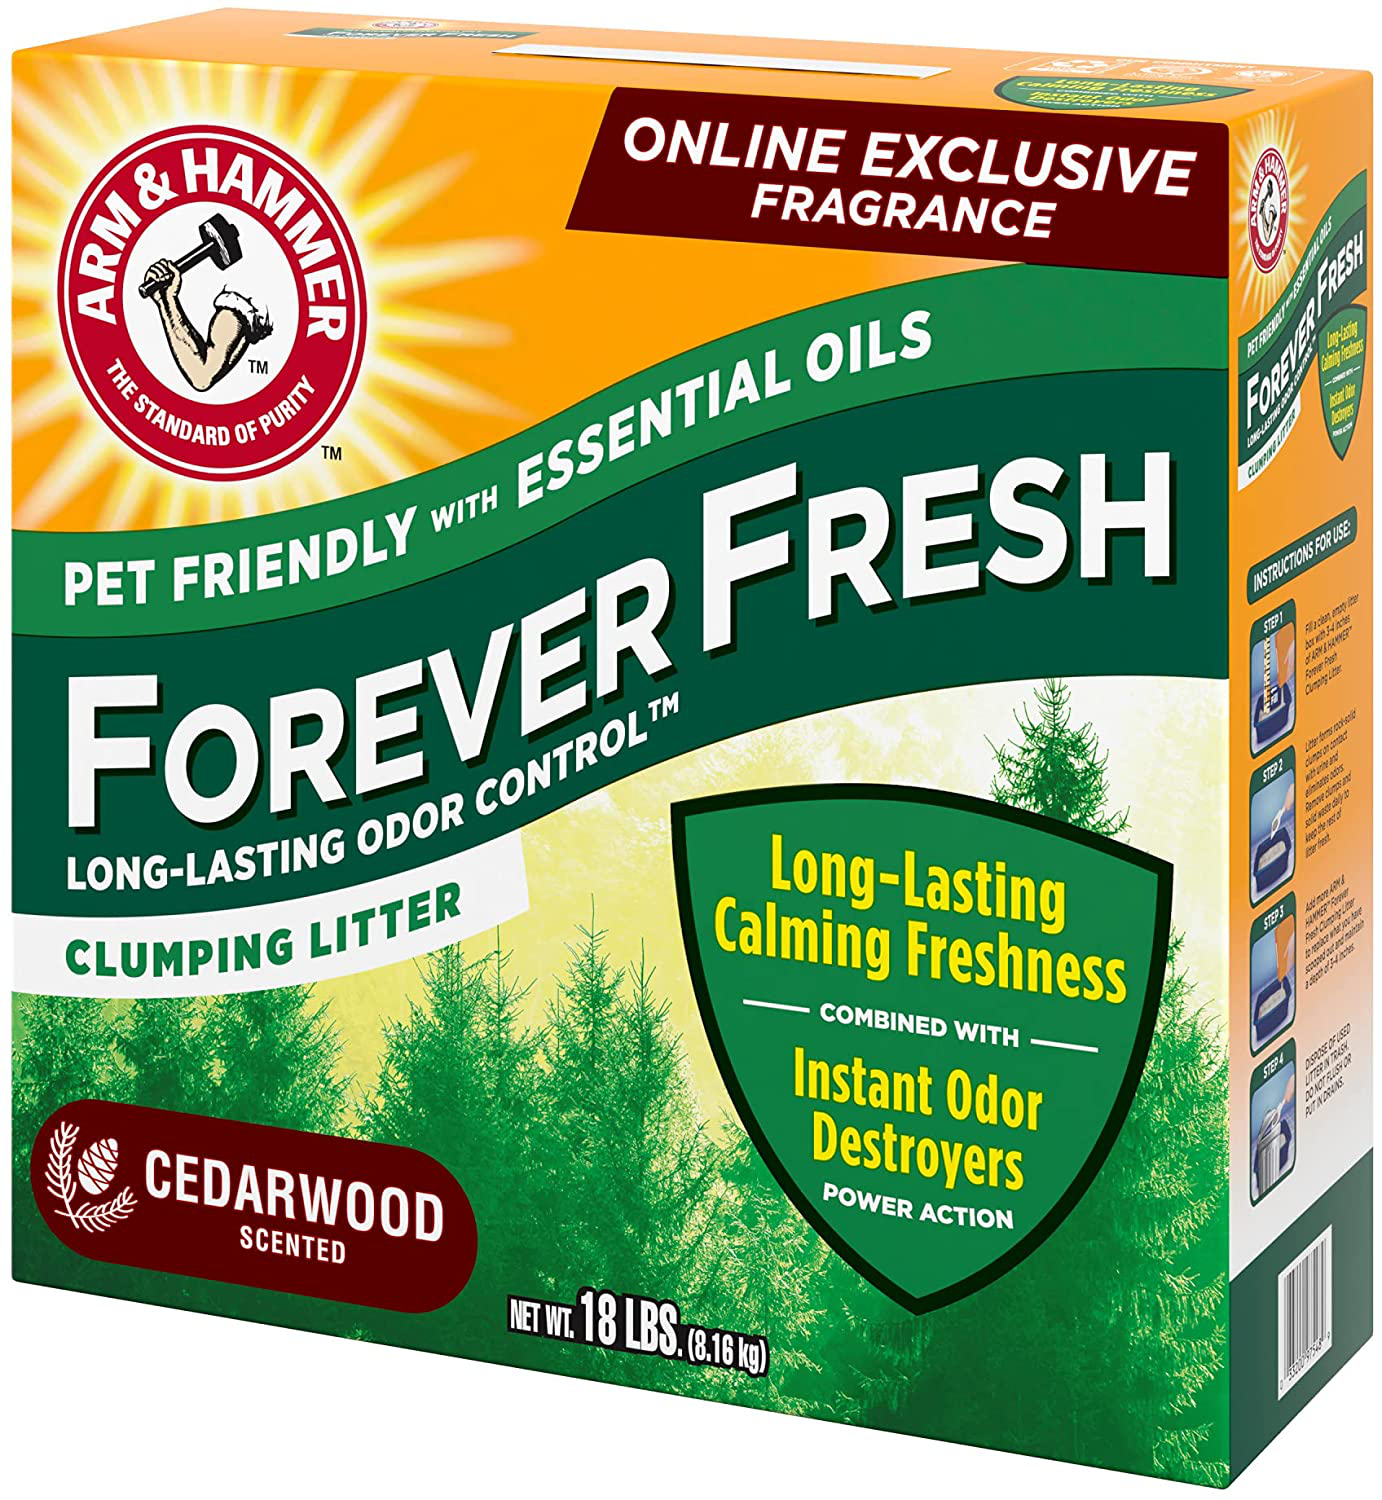 Arm & Hammer Ultra Last Unscented Clumping Cat Litter, Multicat 18Lb, Pet Friendly with Baking Soda